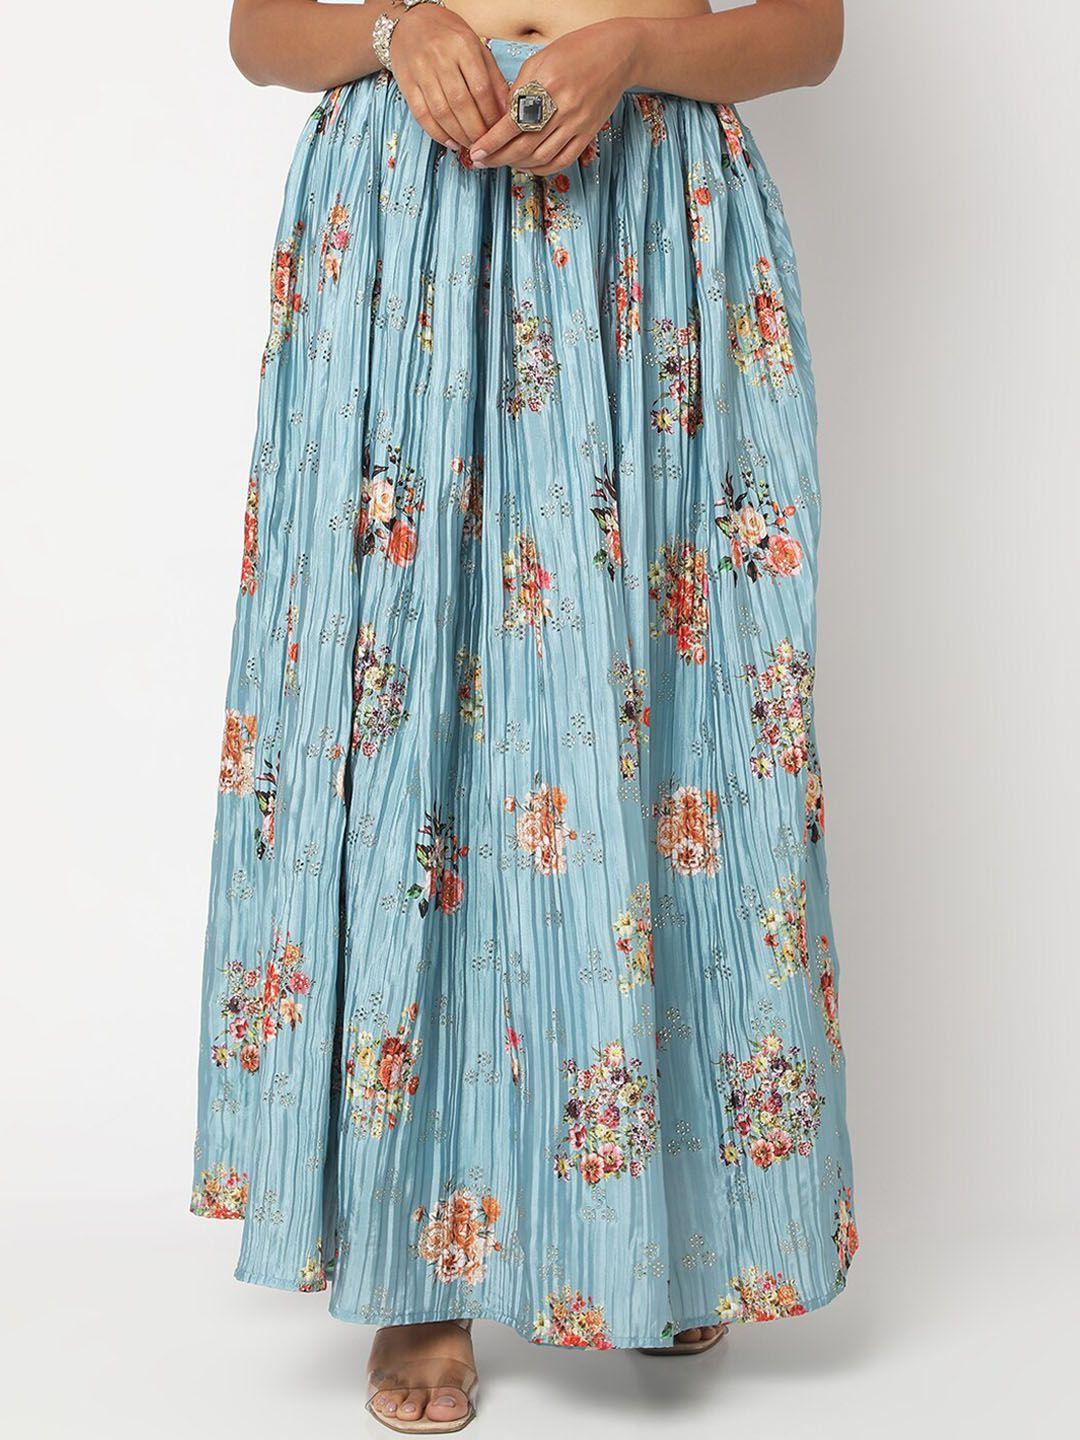 Ethnicity Women Floral Printed Flared Maxi Skirt